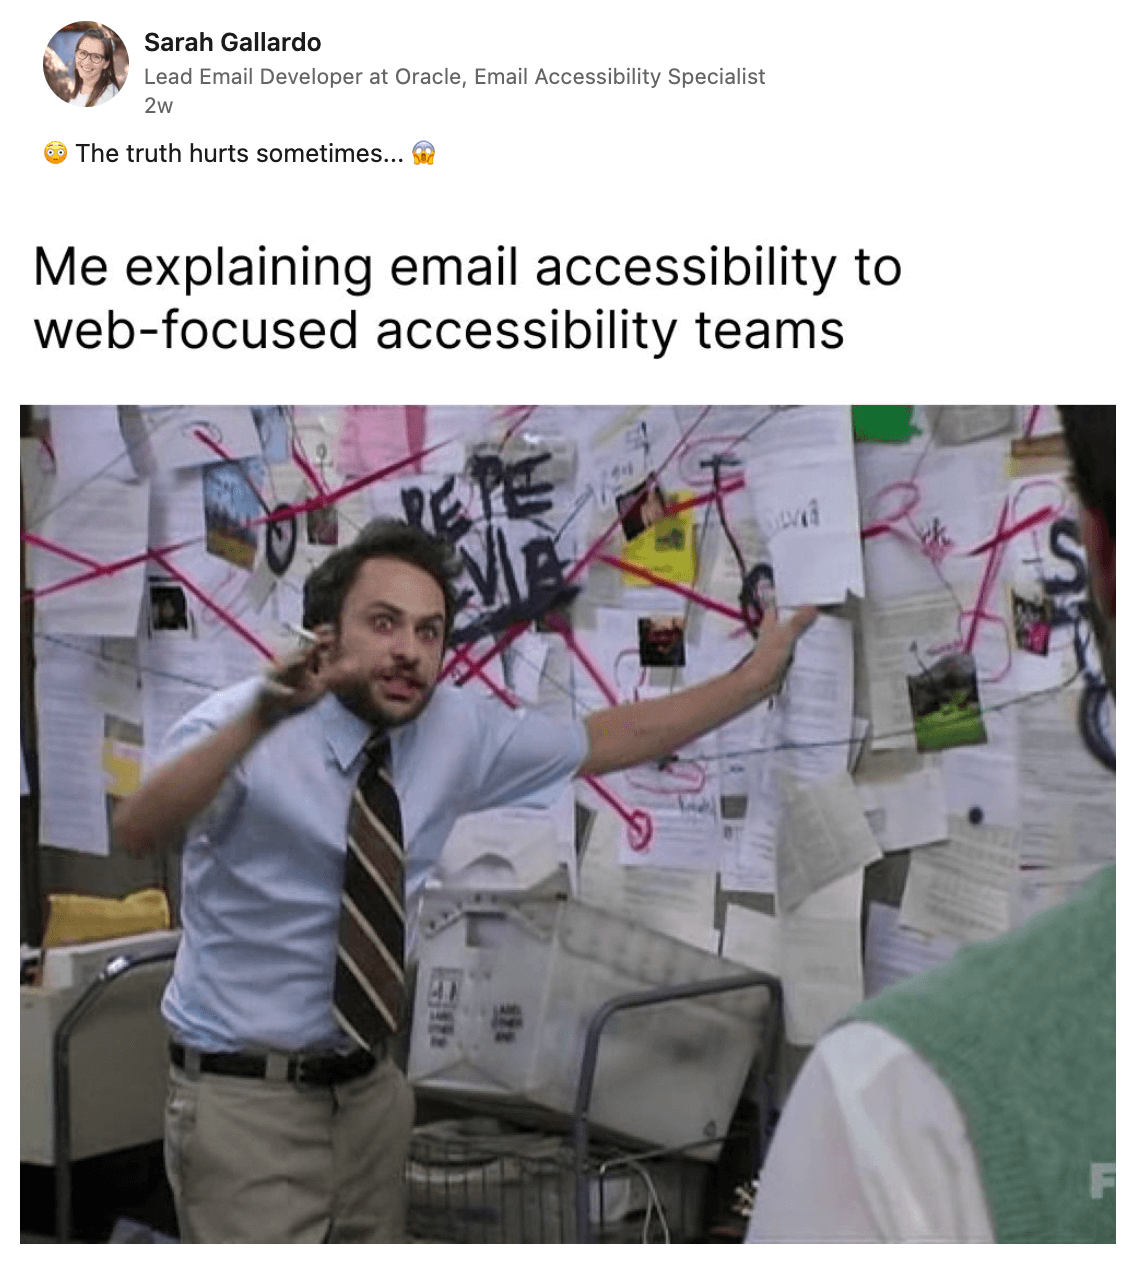 Sarah Gallardo on LinkedIn says: 'The truth hurt sometimes...' with an image that says 'me explaining email accessibility to web-focused accessibility teams' with a person who has a very complex diagram mapping behind them.